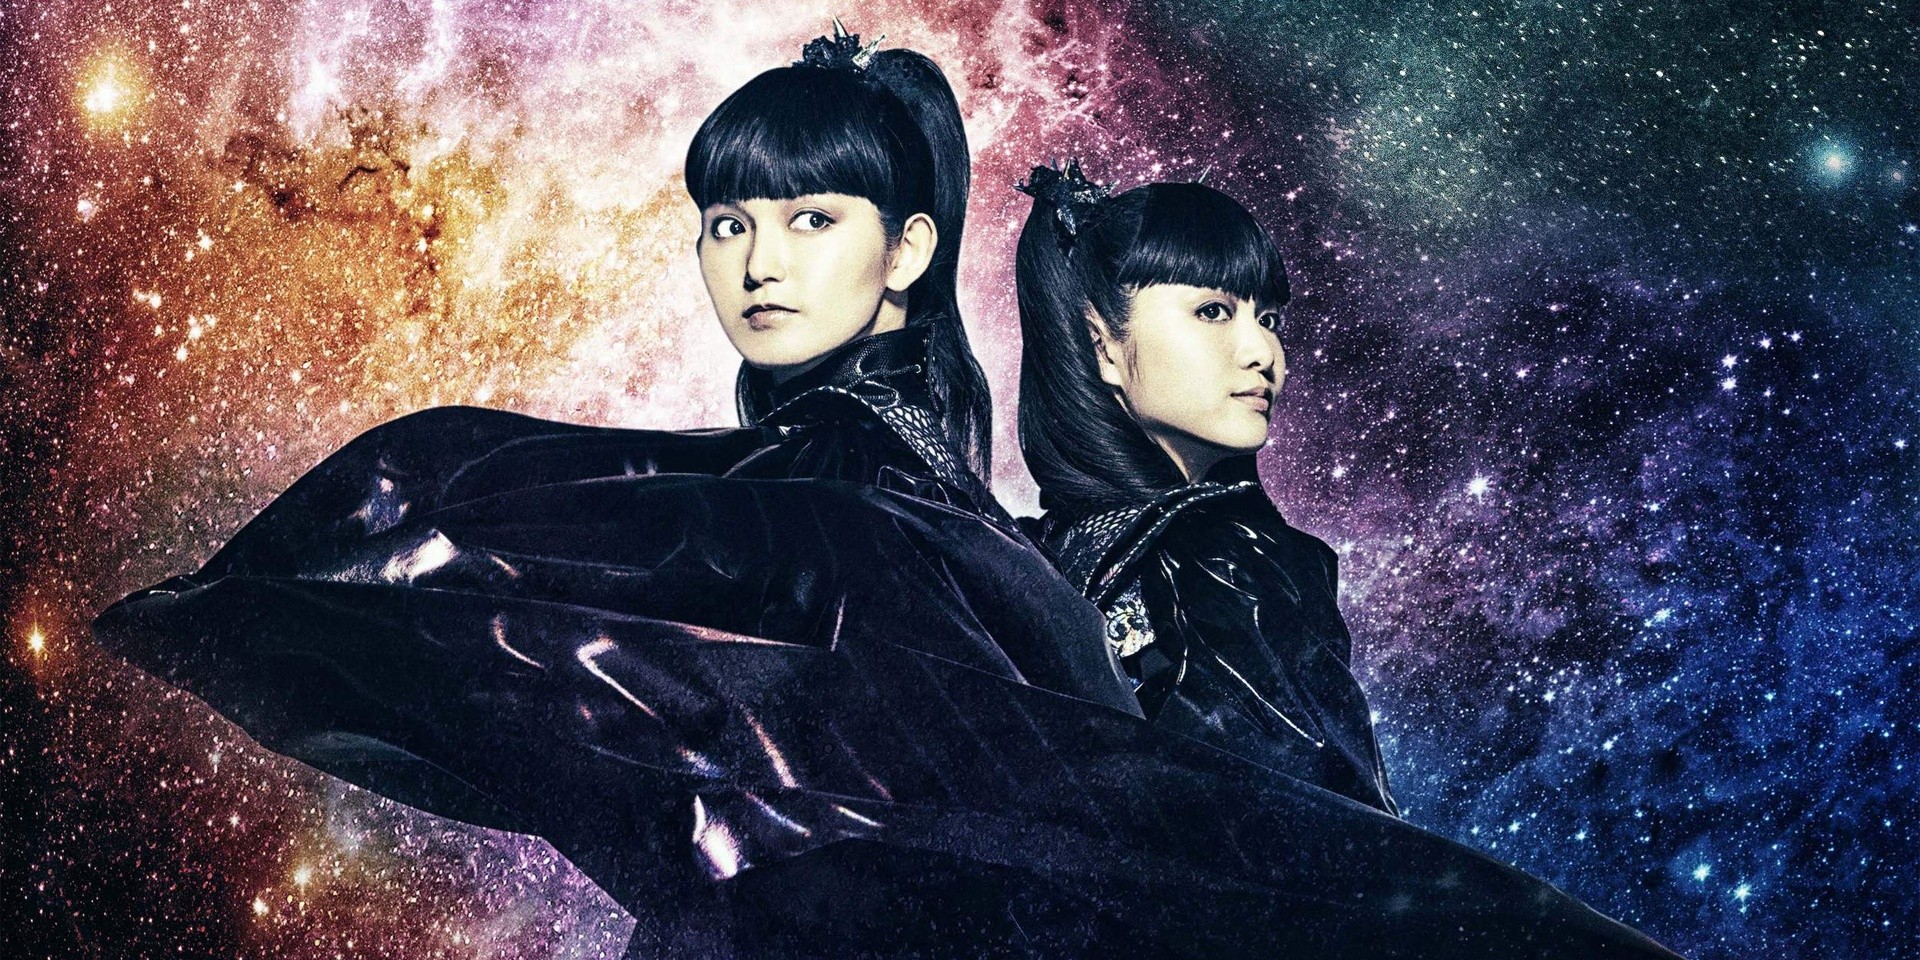 BABYMETAL to celebrate 10th anniversary with special compilation album, announce Bring Me the Horizon collaboration